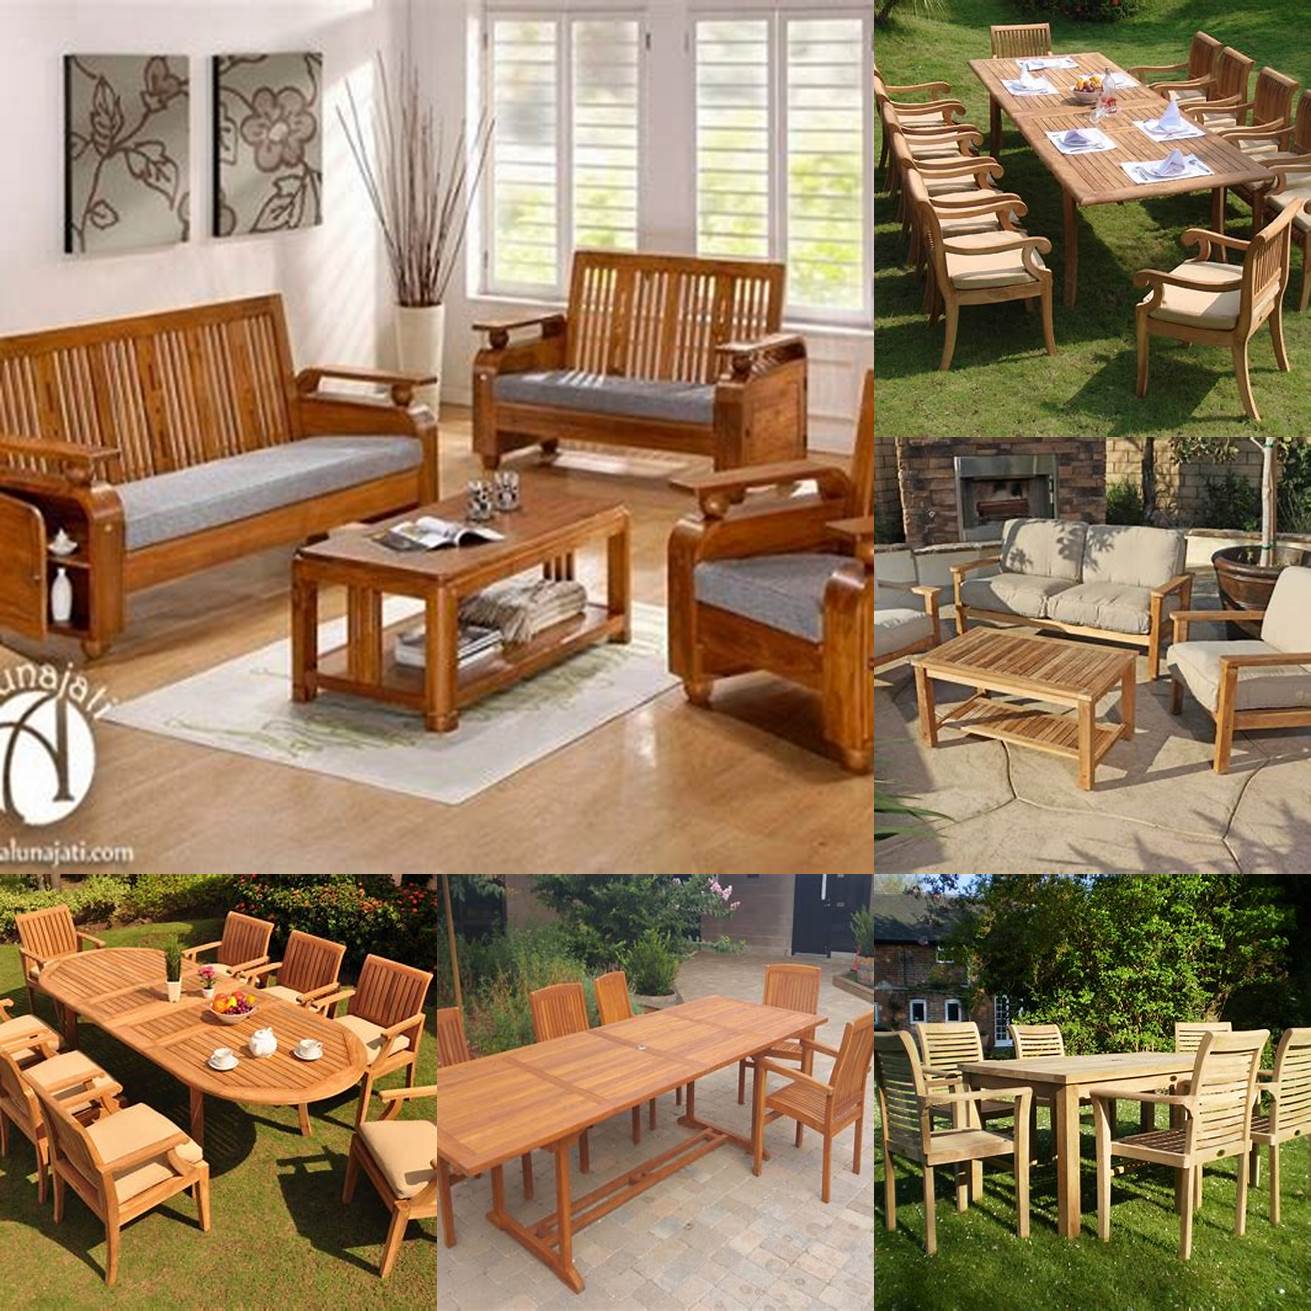 Teak Wood Furniture of Different Styles